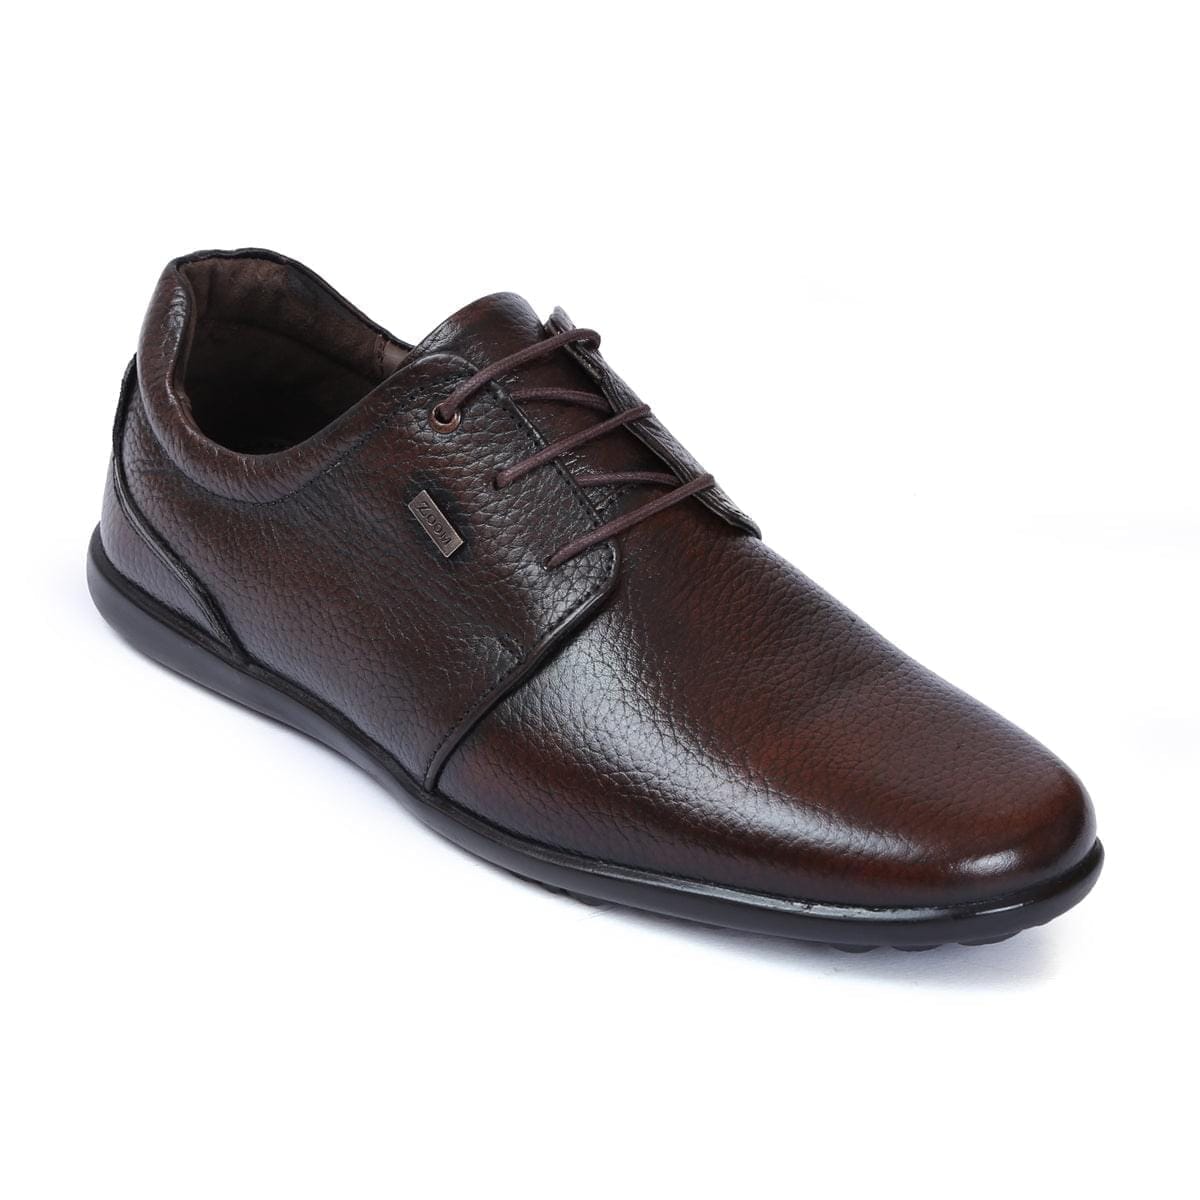 Casual Lace Up Shoes for Men in Genuine Leather NH – 77